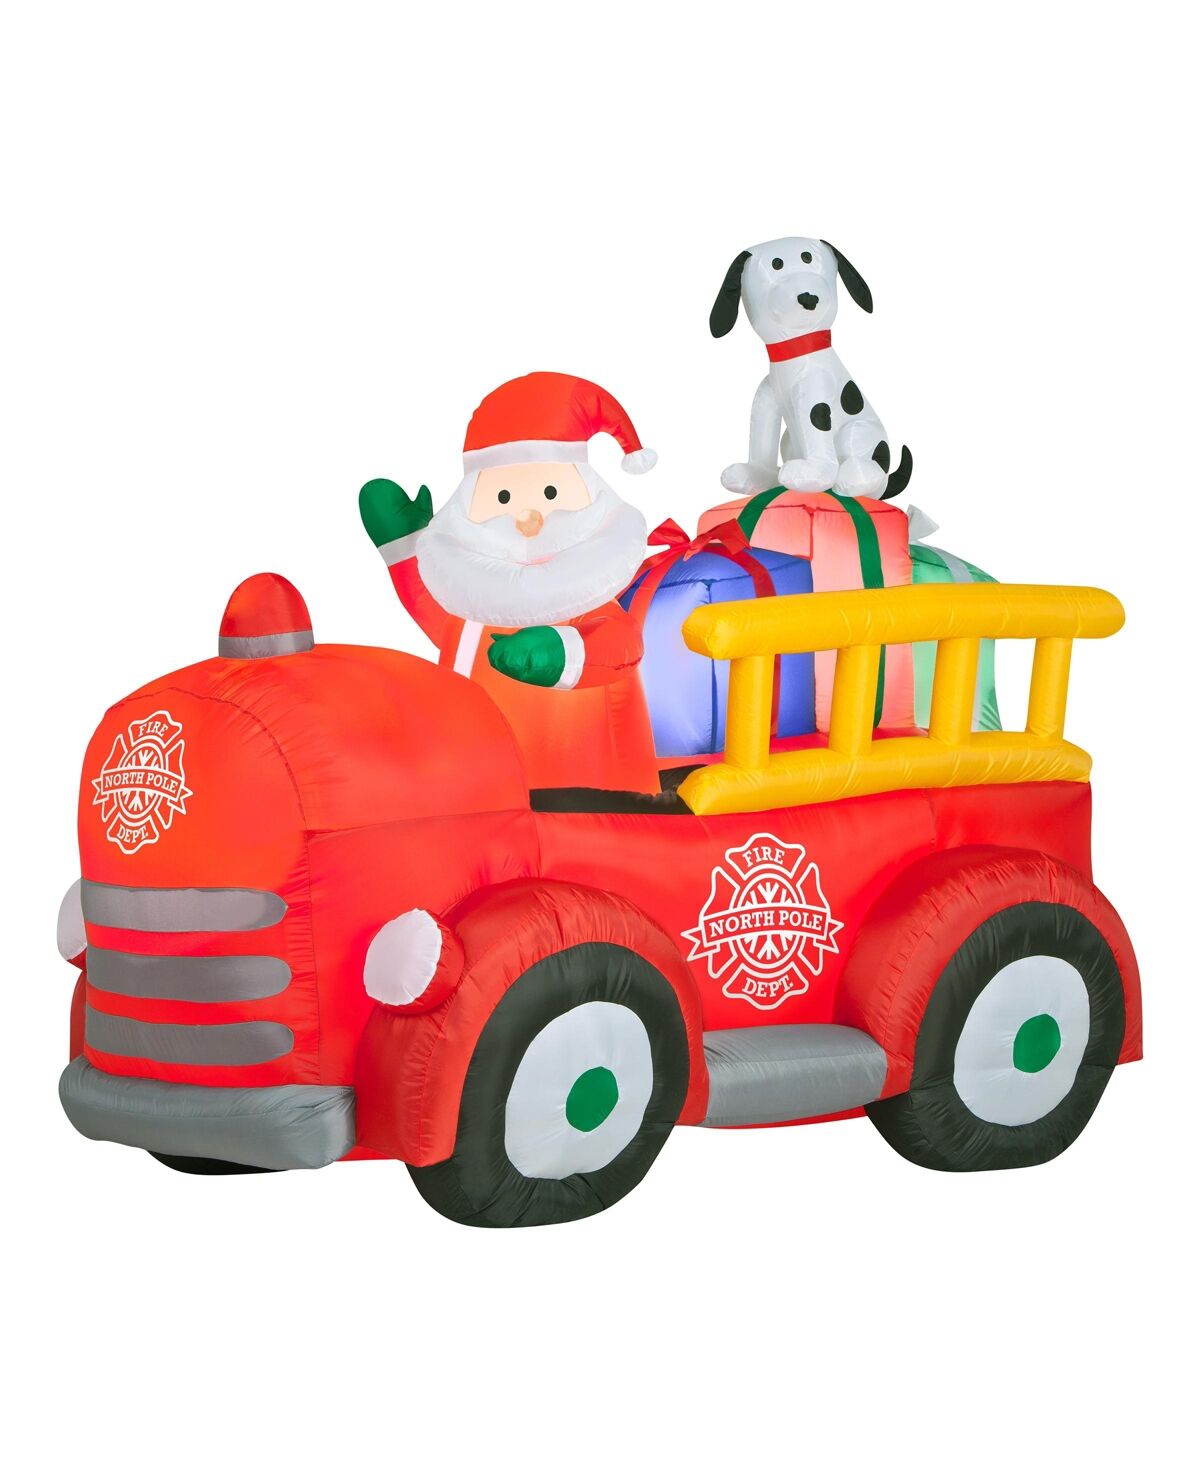 National Tree Company 6' Inflatable Santa in Vintage-Like Fire truck - Red